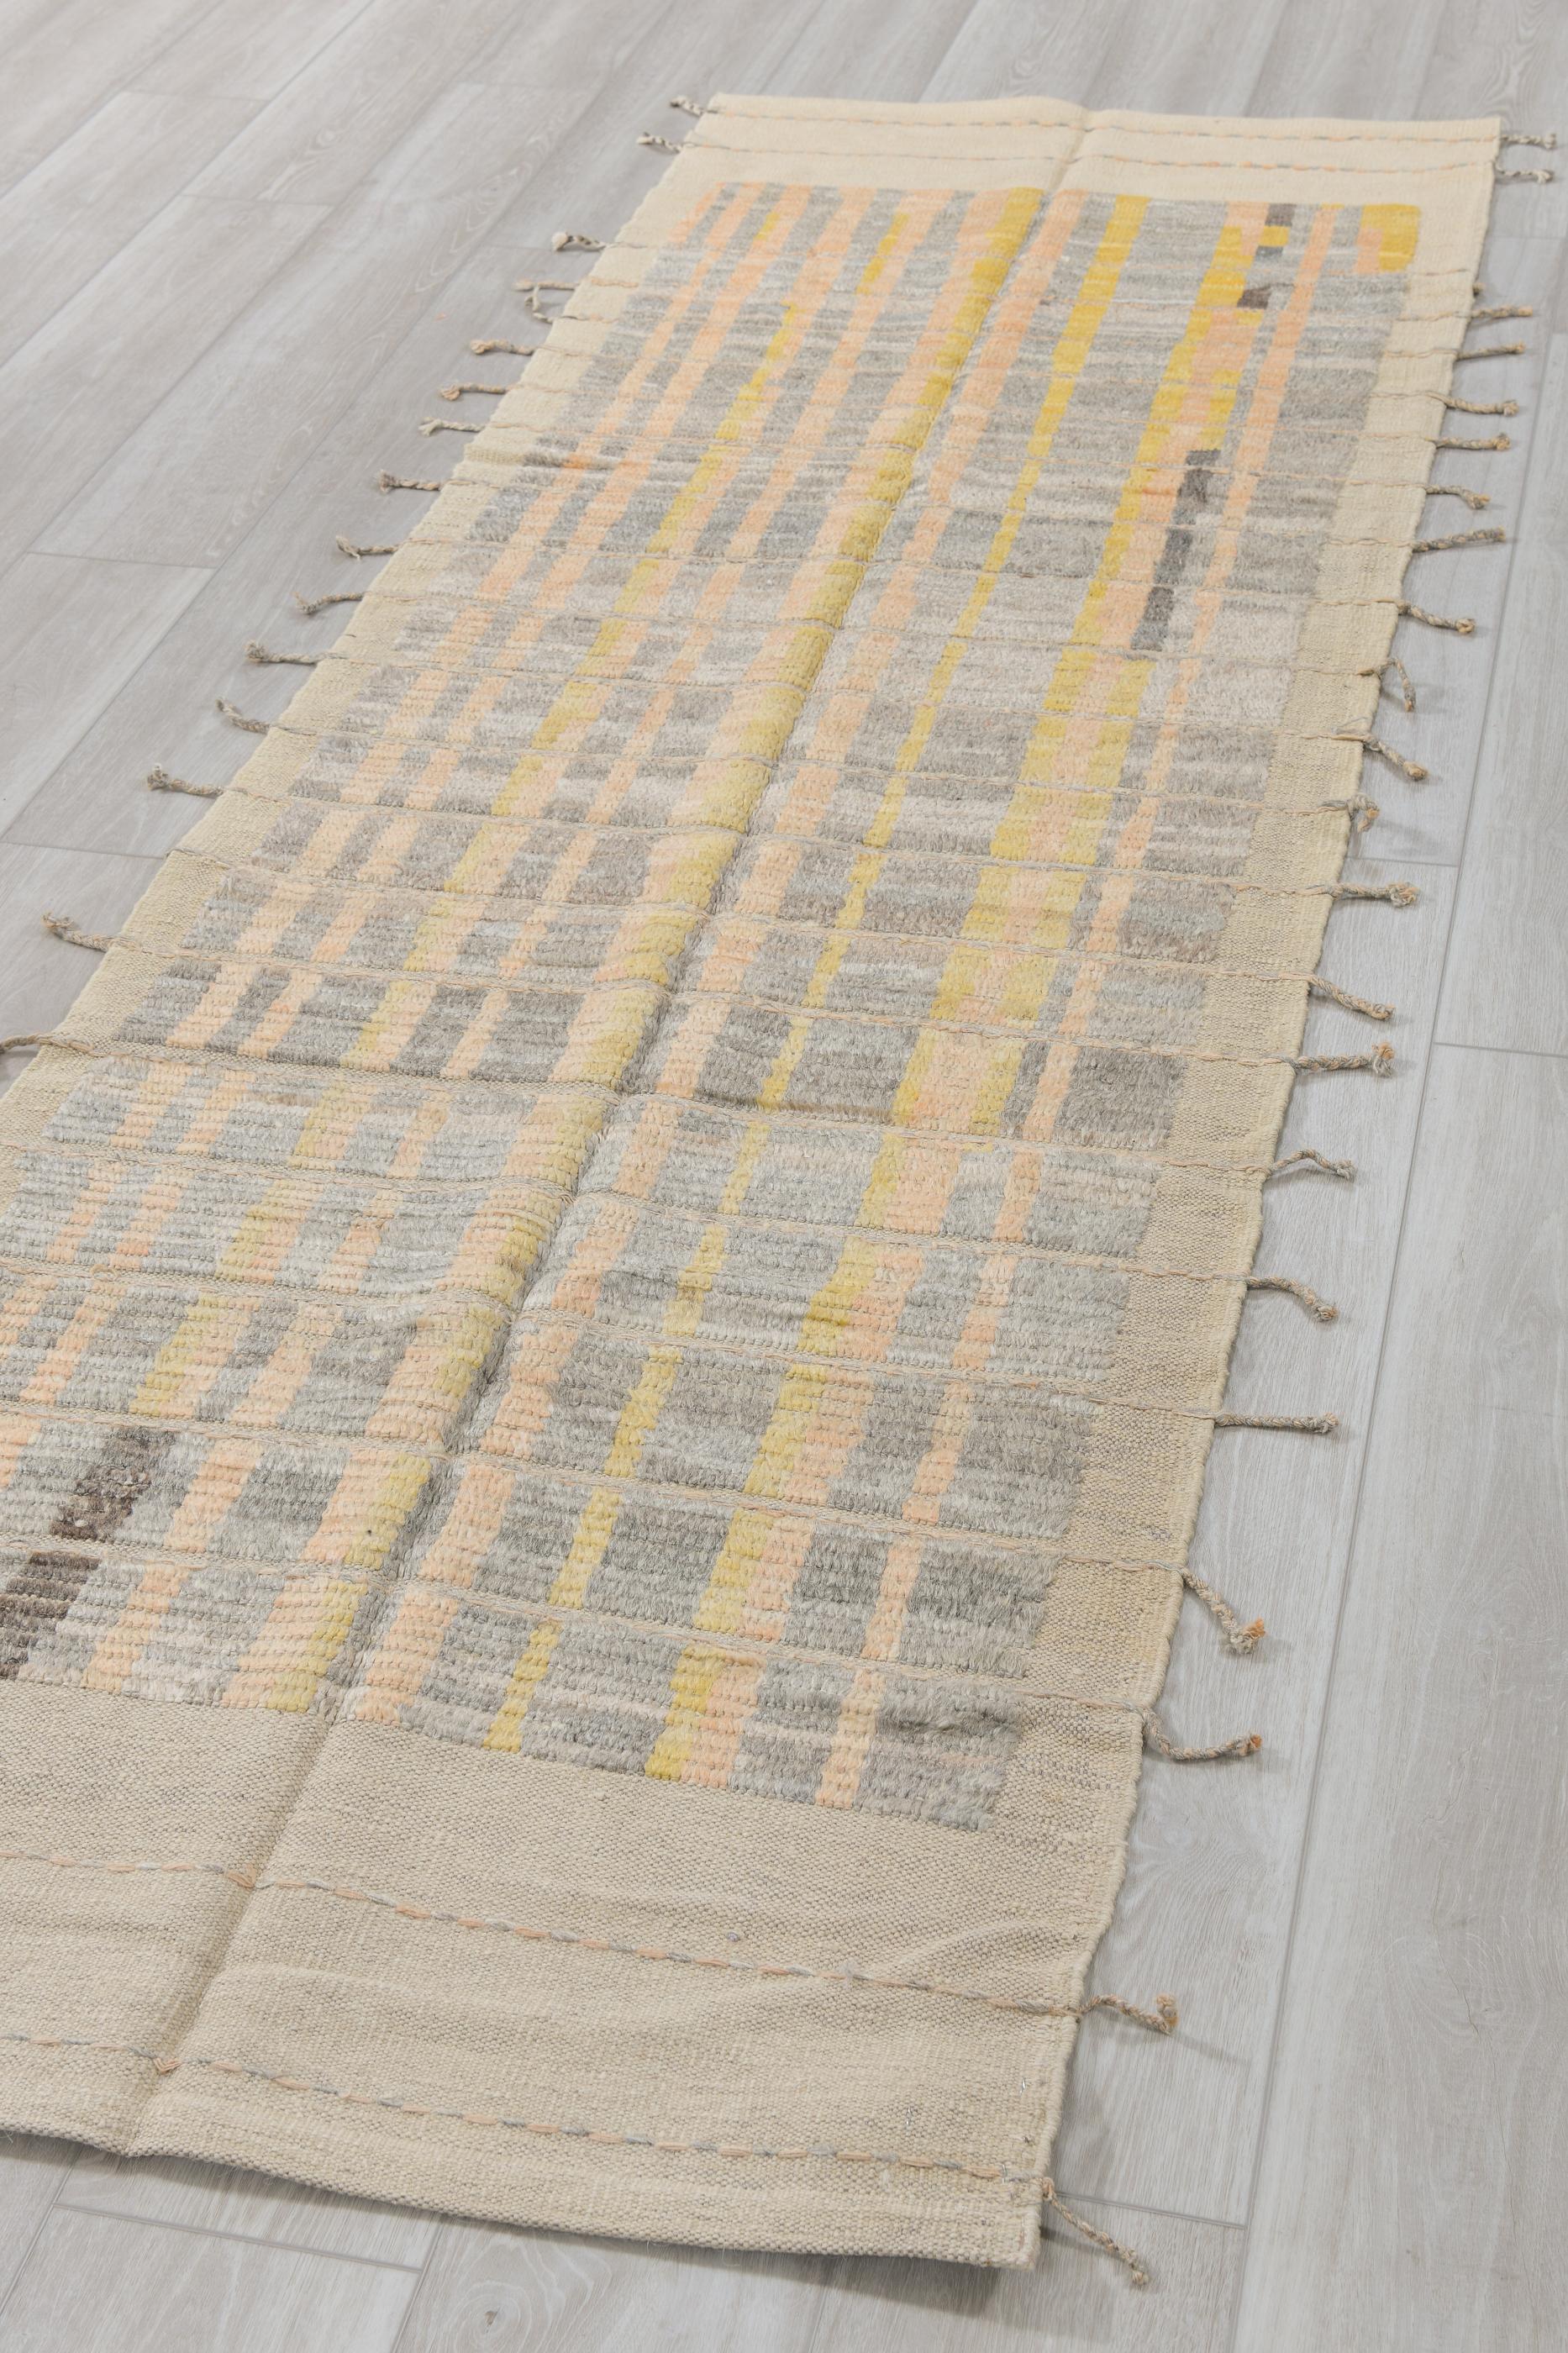 Turkish origin name for rugs made by villagers for domestic use, often in small sizes, due to loom size restrictions inside homes. They are woven as thick, shaggy rugs using the softest yarn available to provide warmth and insulation during winter